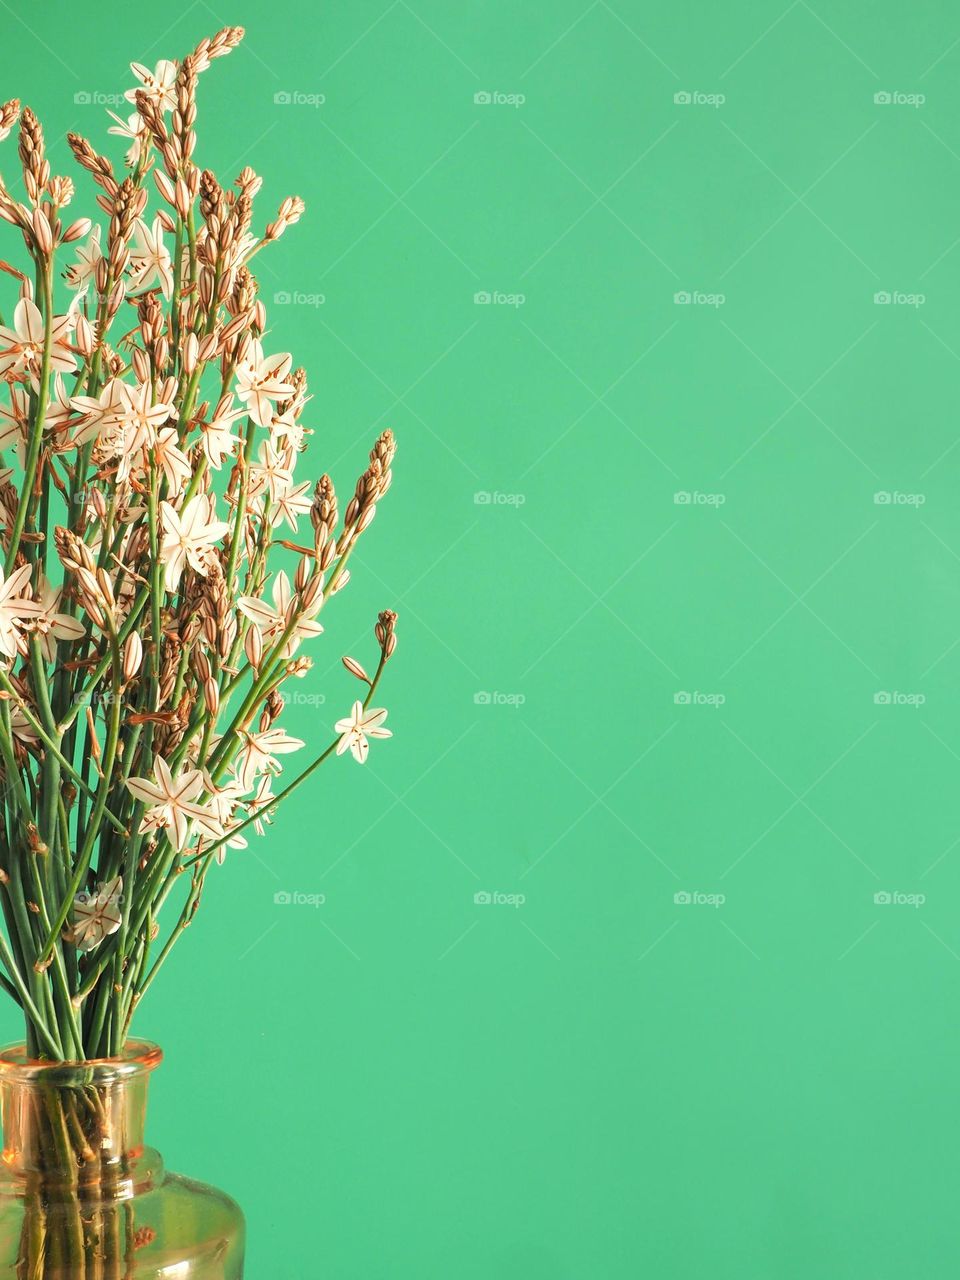 Flowers and green background